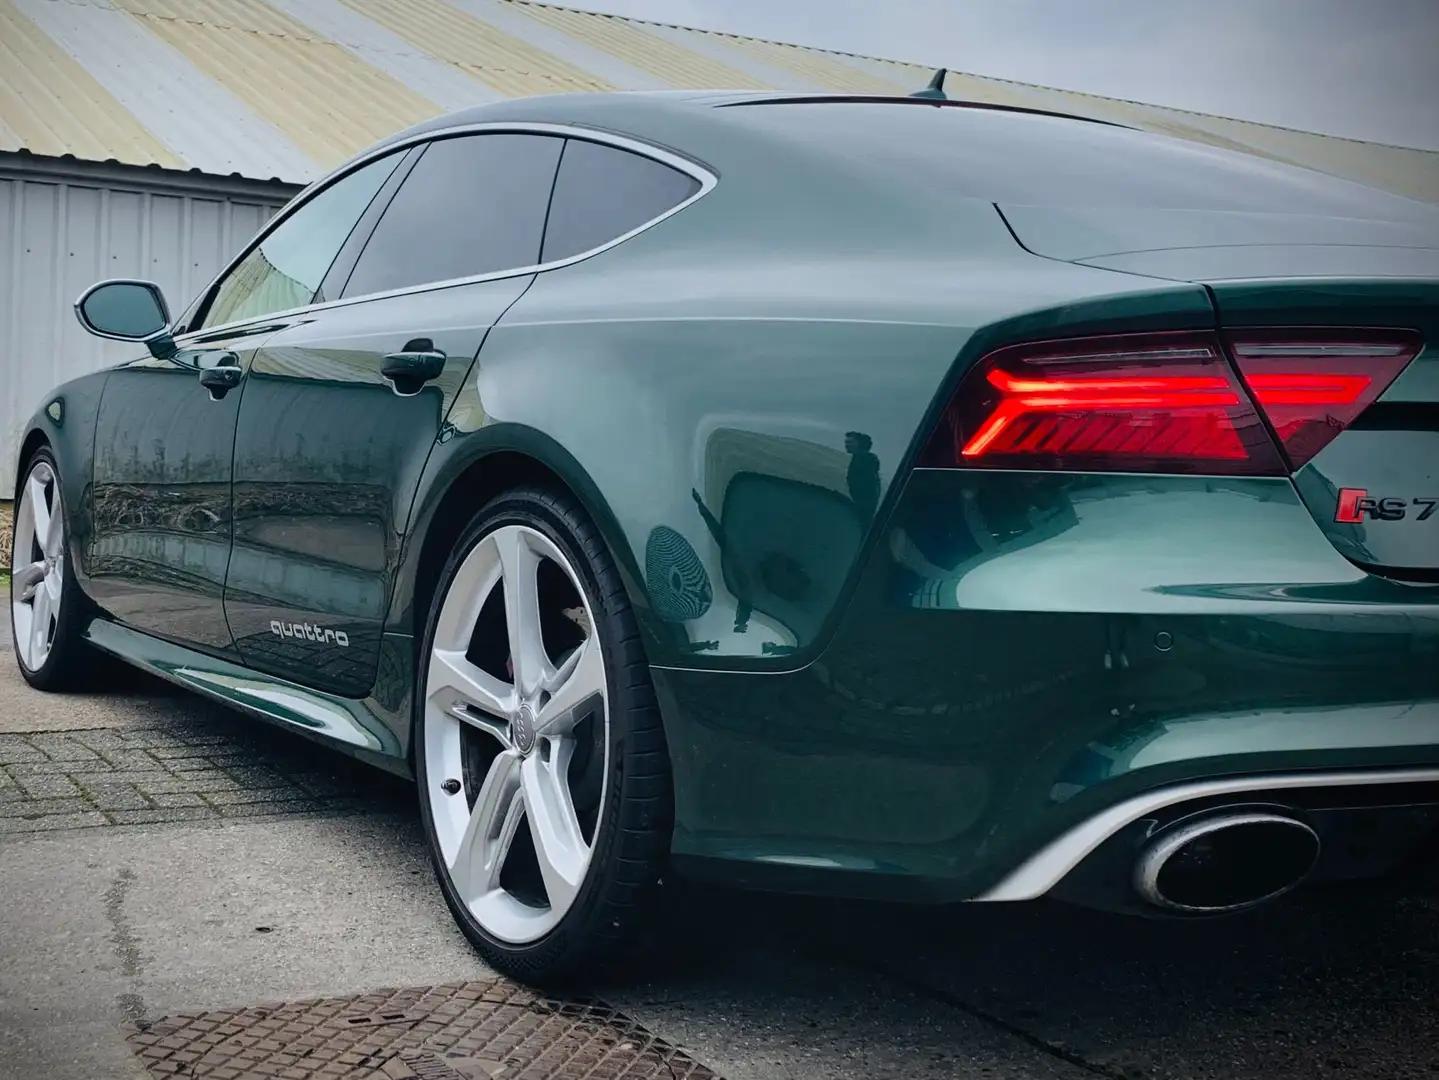 Audi RS7 Verdant Green - Audi Exclusive - from collector Yeşil - 2